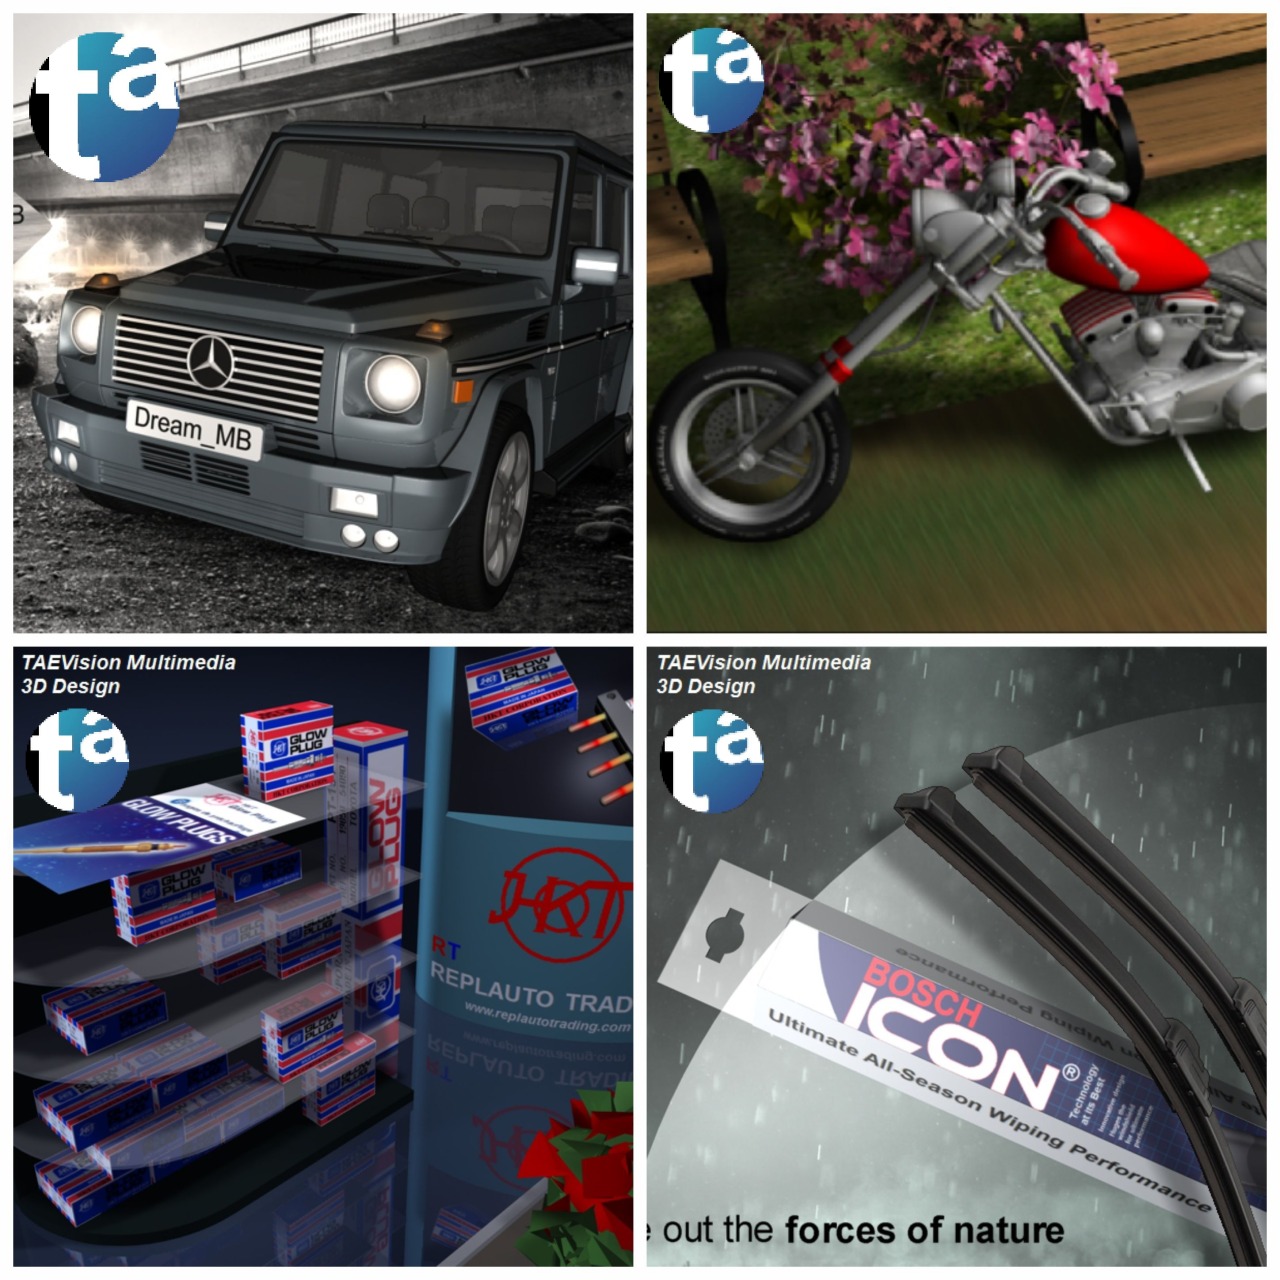 📰 TAEVision Engineering s Posts - Wed, Jan 19, 2022

TAEVision 3D Mechanical Design
▪ Automotive Machinery Agriculture
MercedesBenz GClass IRON Project
▪ Automotive Motorcycles Fashion NY NYC
HarleyDavidson Chopper CentralPark
▪ Parts AutoParts Aftermarket
HKT Corp GlowPlugs
Bosch ICON wiperblades

01 - Data 266
Automotive
Machinery Agriculture Farm Farms Farming
MercedesBenz GClass GWagon OffRoad
IRON Project 01
Shöckl Suffolk County NY

▸ TAEVision Engineerings Post on Tumblr

02 - Data 352
Automotive Motorcycles Fashion NY NYC
CentralPark Conservatory Garden
HarleyDavidson Chopper Harley @CentralPark_NYC

▸ TAEVision Engineerings Post on Tumblr

03 - Data 255
Parts AutoParts Aftermarket
HKT Corp GlowPlugs (Display Exhibition)

▸ TAEVision Engineerings Post on Tumblr

04 - Data 112
Parts AutoParts Aftermarket
Bosch ICON wiperblades WindshieldWipers (Rain Ambient 1)

▸ TAEVision Engineerings Post on Tumblr📰 I just updated my Pressfolio:
TAEVision Mechanics - Global Data - Jan 19, 2022

▸ TAEVision Mechanicss Online PortfolioGlobal Data - Jan 19, 2022 #TAEVision#engineering#3d#mechanicaldesign#automotive#machinery#agriculture#MercedesBenz#GClass#GWagon#offroad#IRONproject#motorcycles #fashion NY NYC #CentralPark#Harley Davidson#HarleyDavidson#HarleyDavidson Chopper#parts#autoparts#aftermarket#HKT Corp#GlowPlugs#display exhibition#BOSCH#BOSCH ICON#wiper blades#WiperBlades#windshield wipers#WindshieldWipers